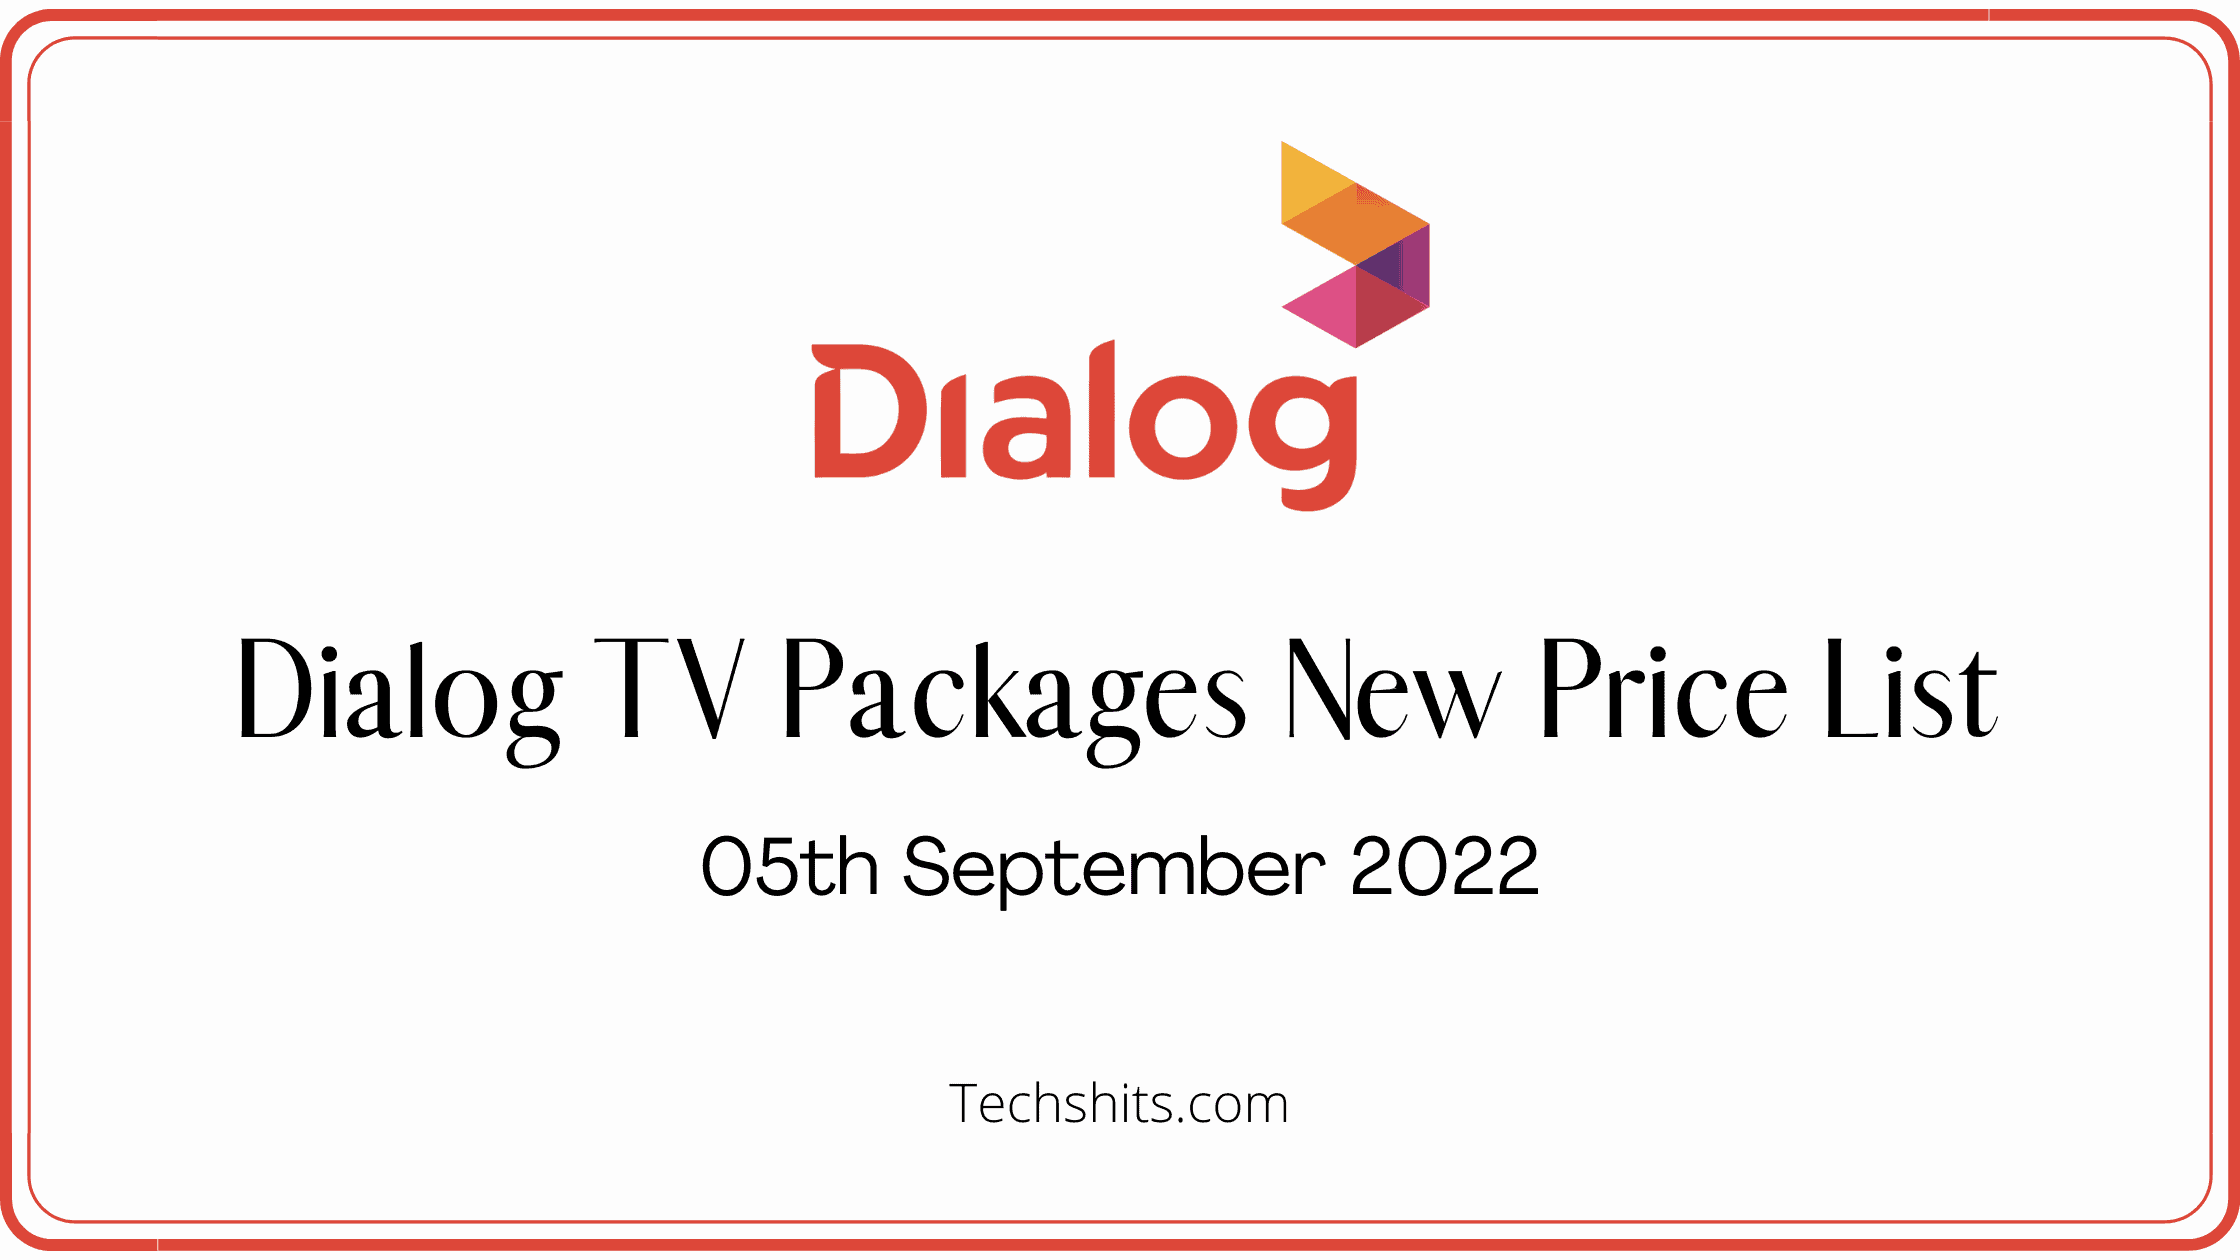 Dialog TV Packages New Price List 2022